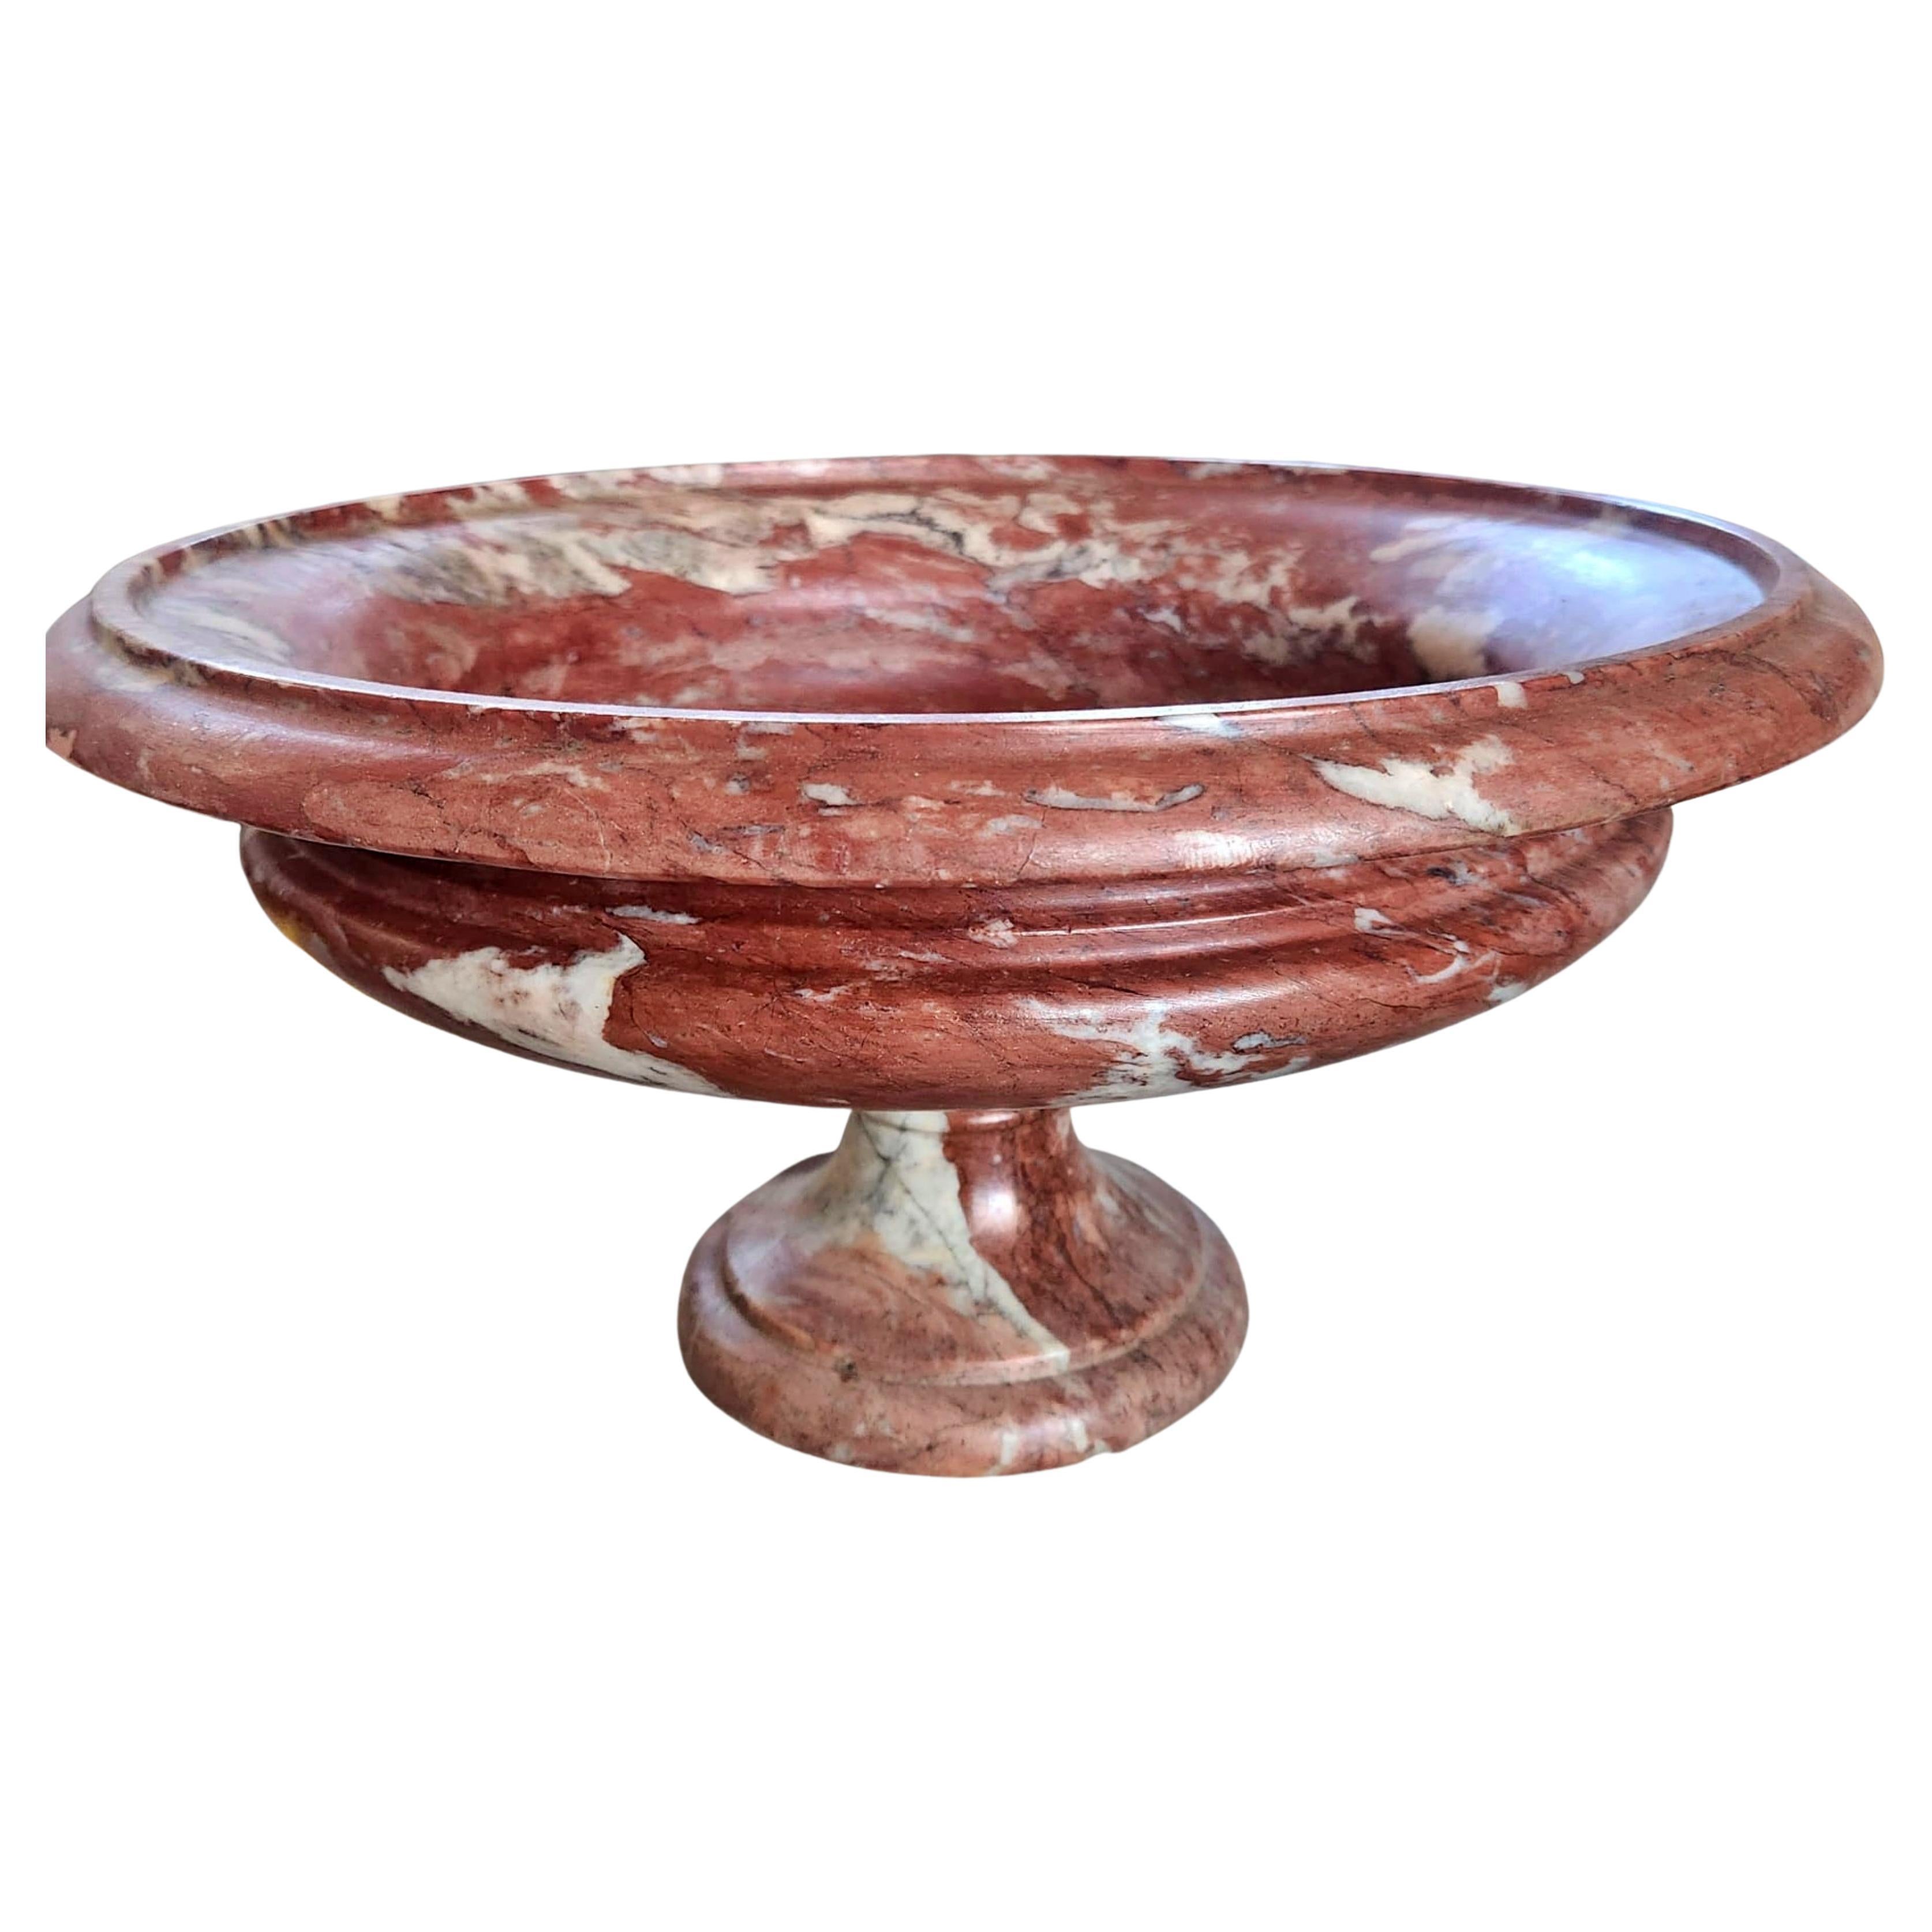 Tuscan RED MARBLE CUP late 19th Century